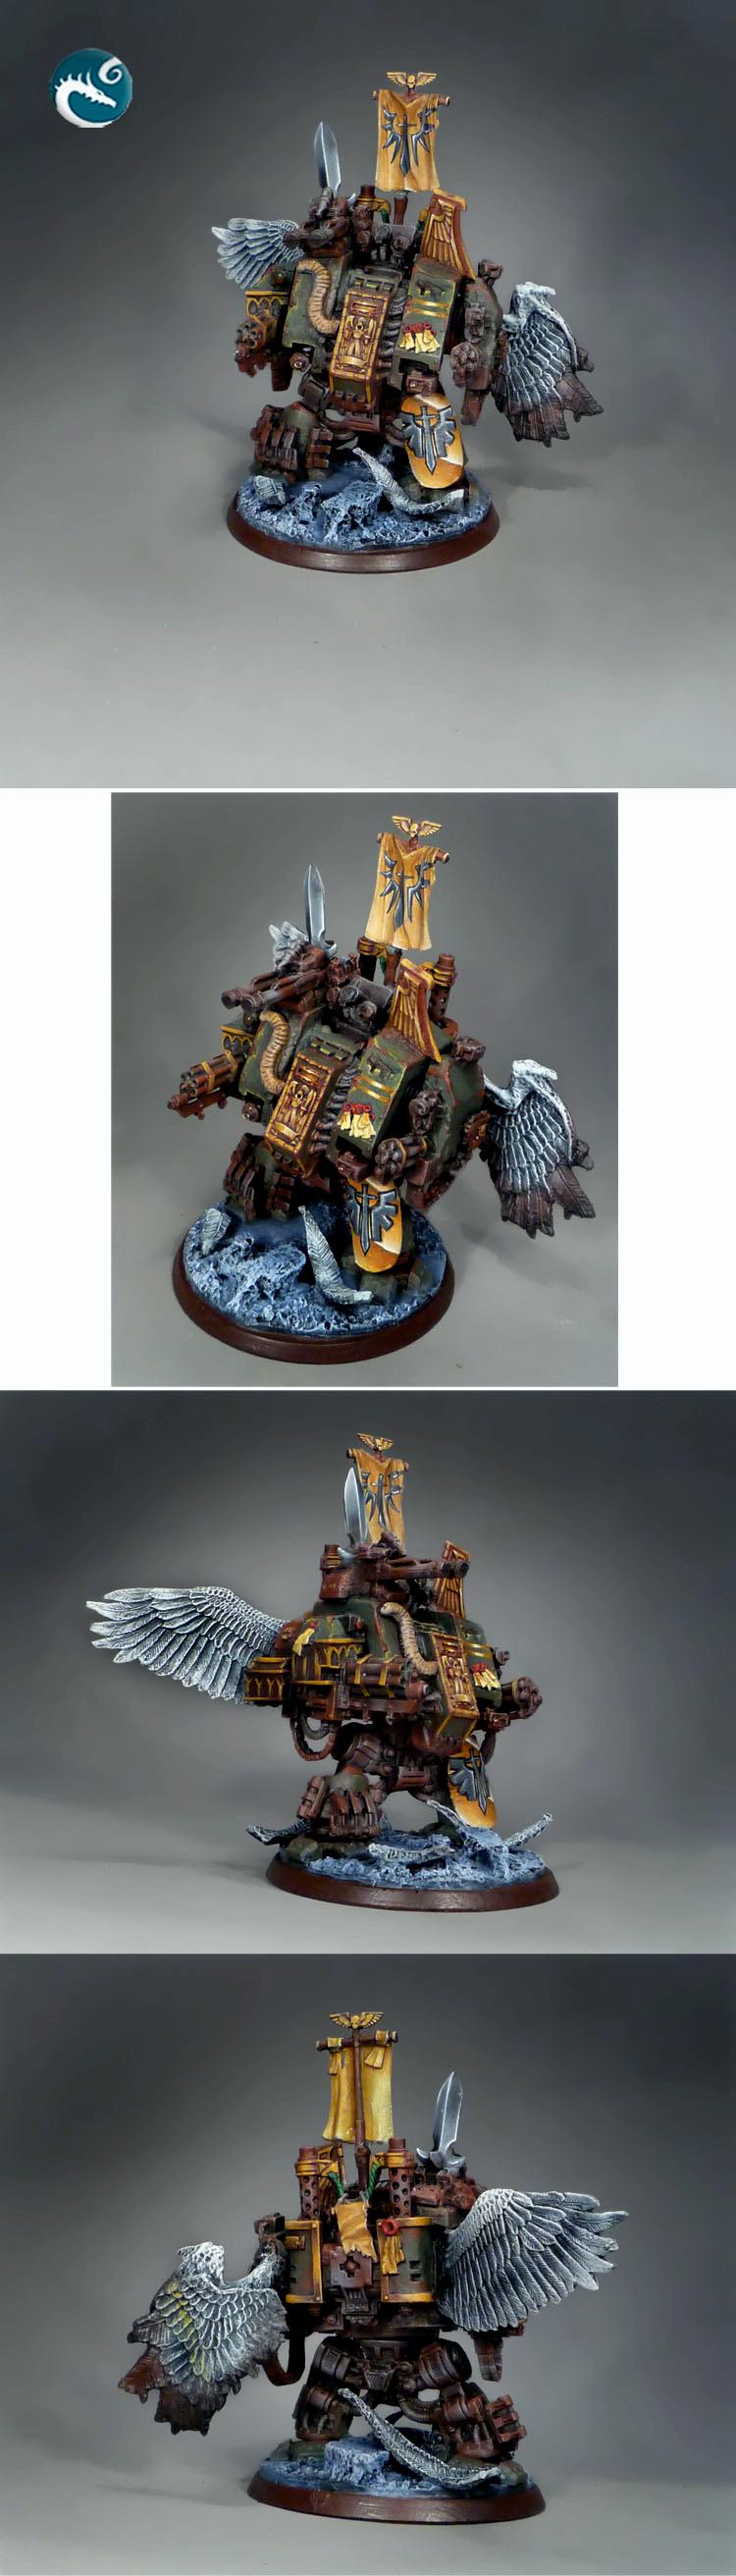 Seeker of Redemption painted